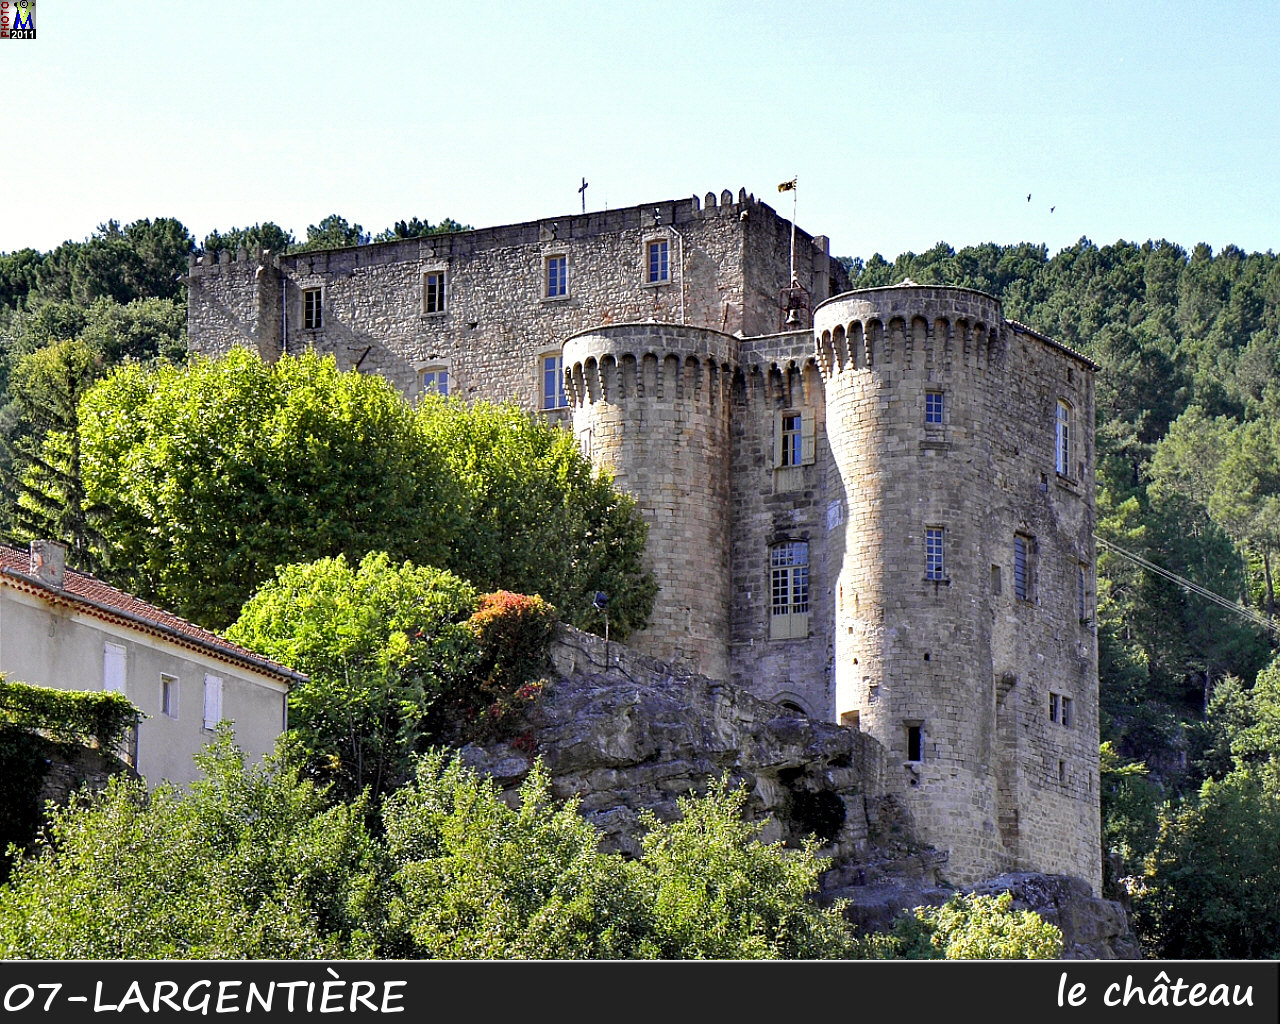 07LARGENTIERE_chateau_110.jpg